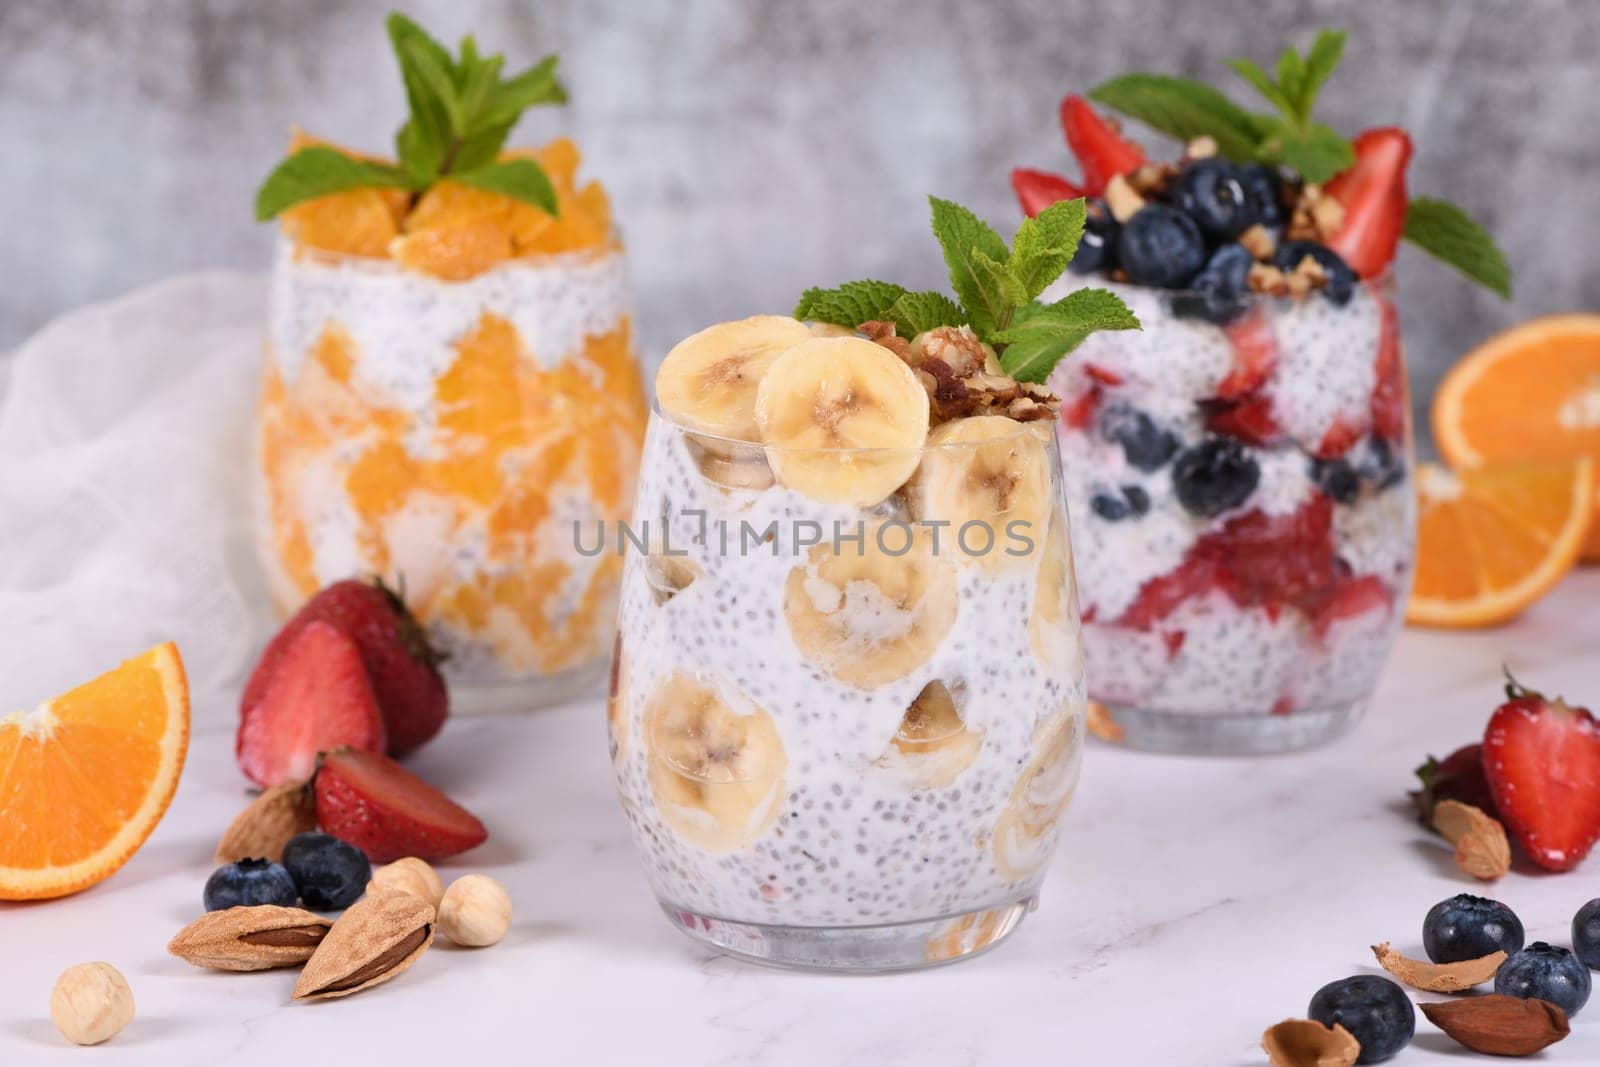 Chia Pudding with Greek Yogurt and Fruit by Apolonia